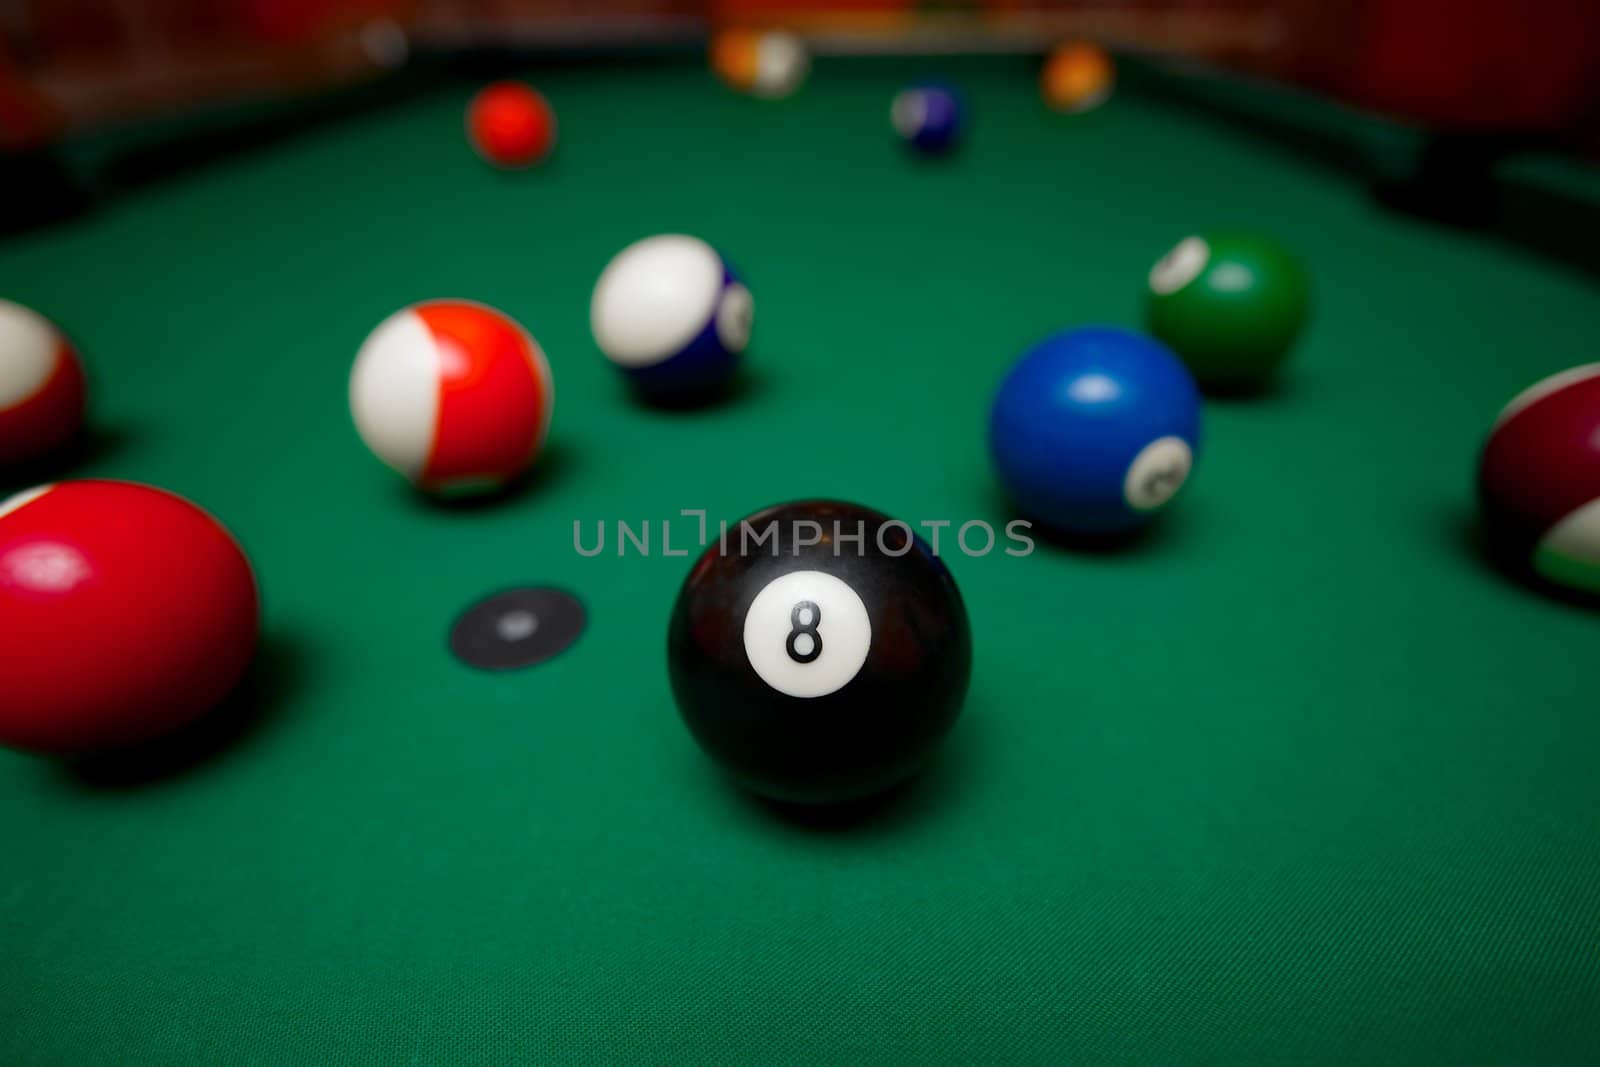 Pool table with the black ball in the middle